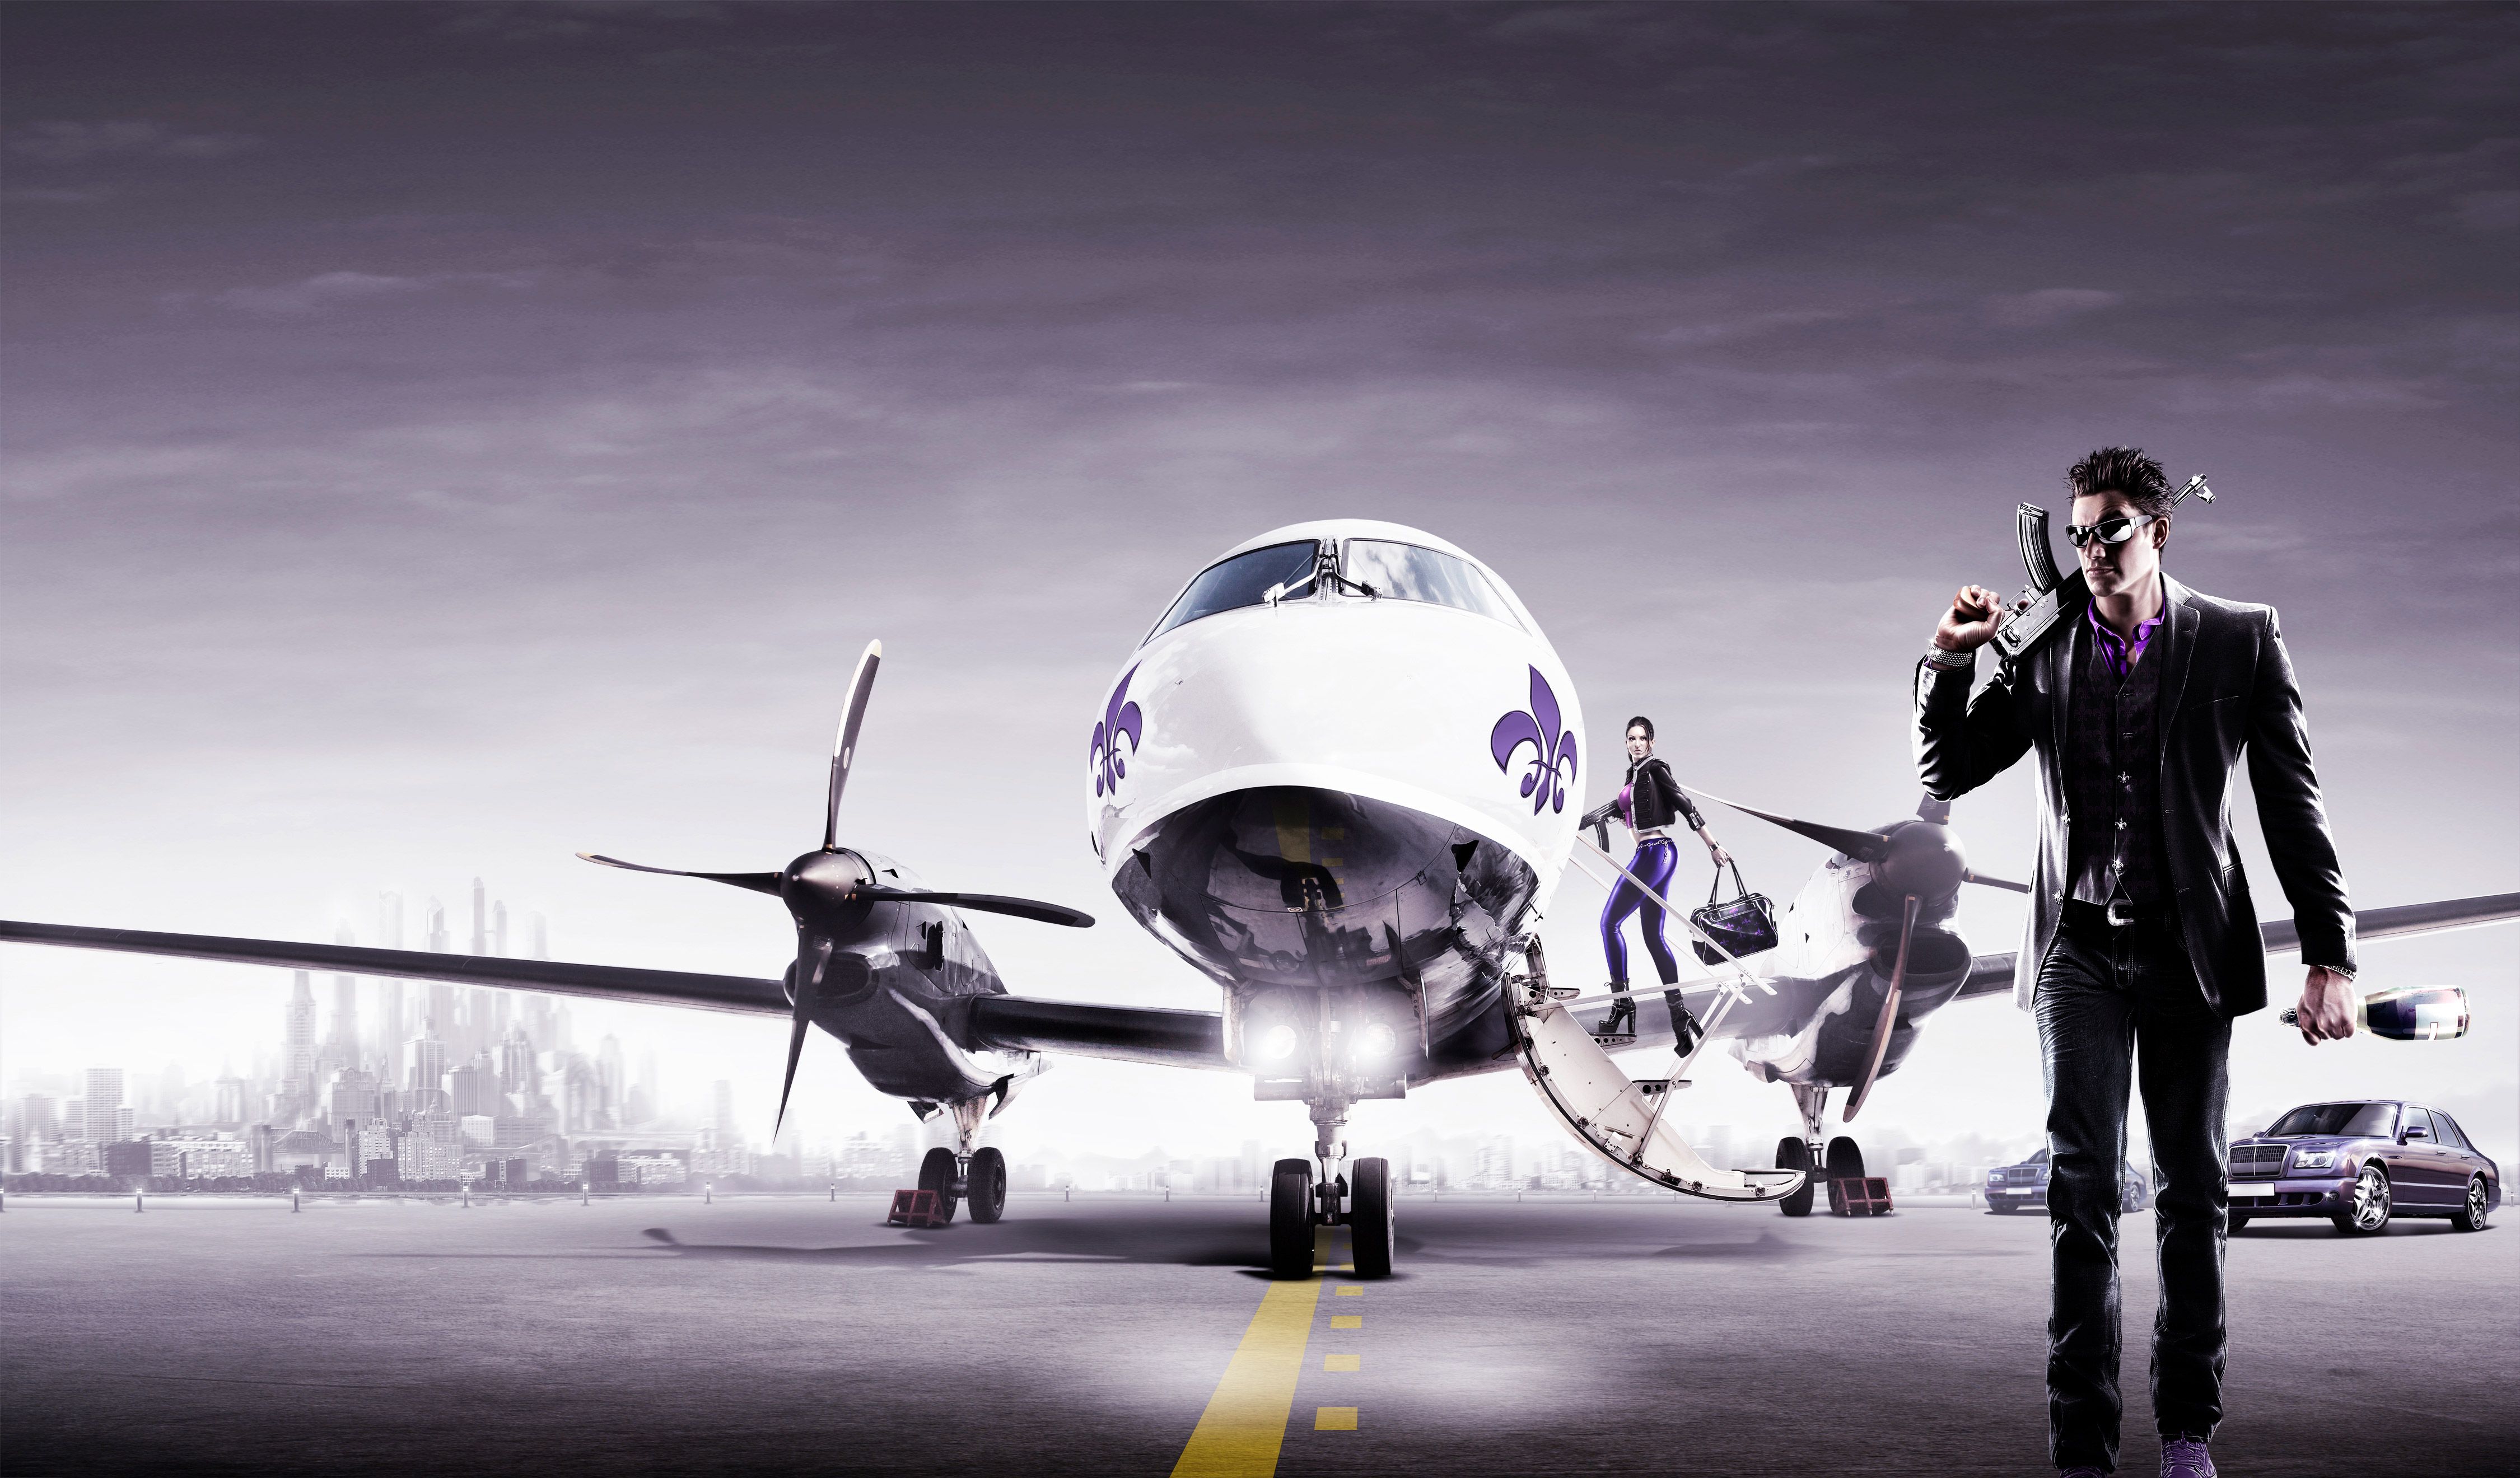 Saints Row The Third Game Private Jet. Games HD 4k Wallpaper